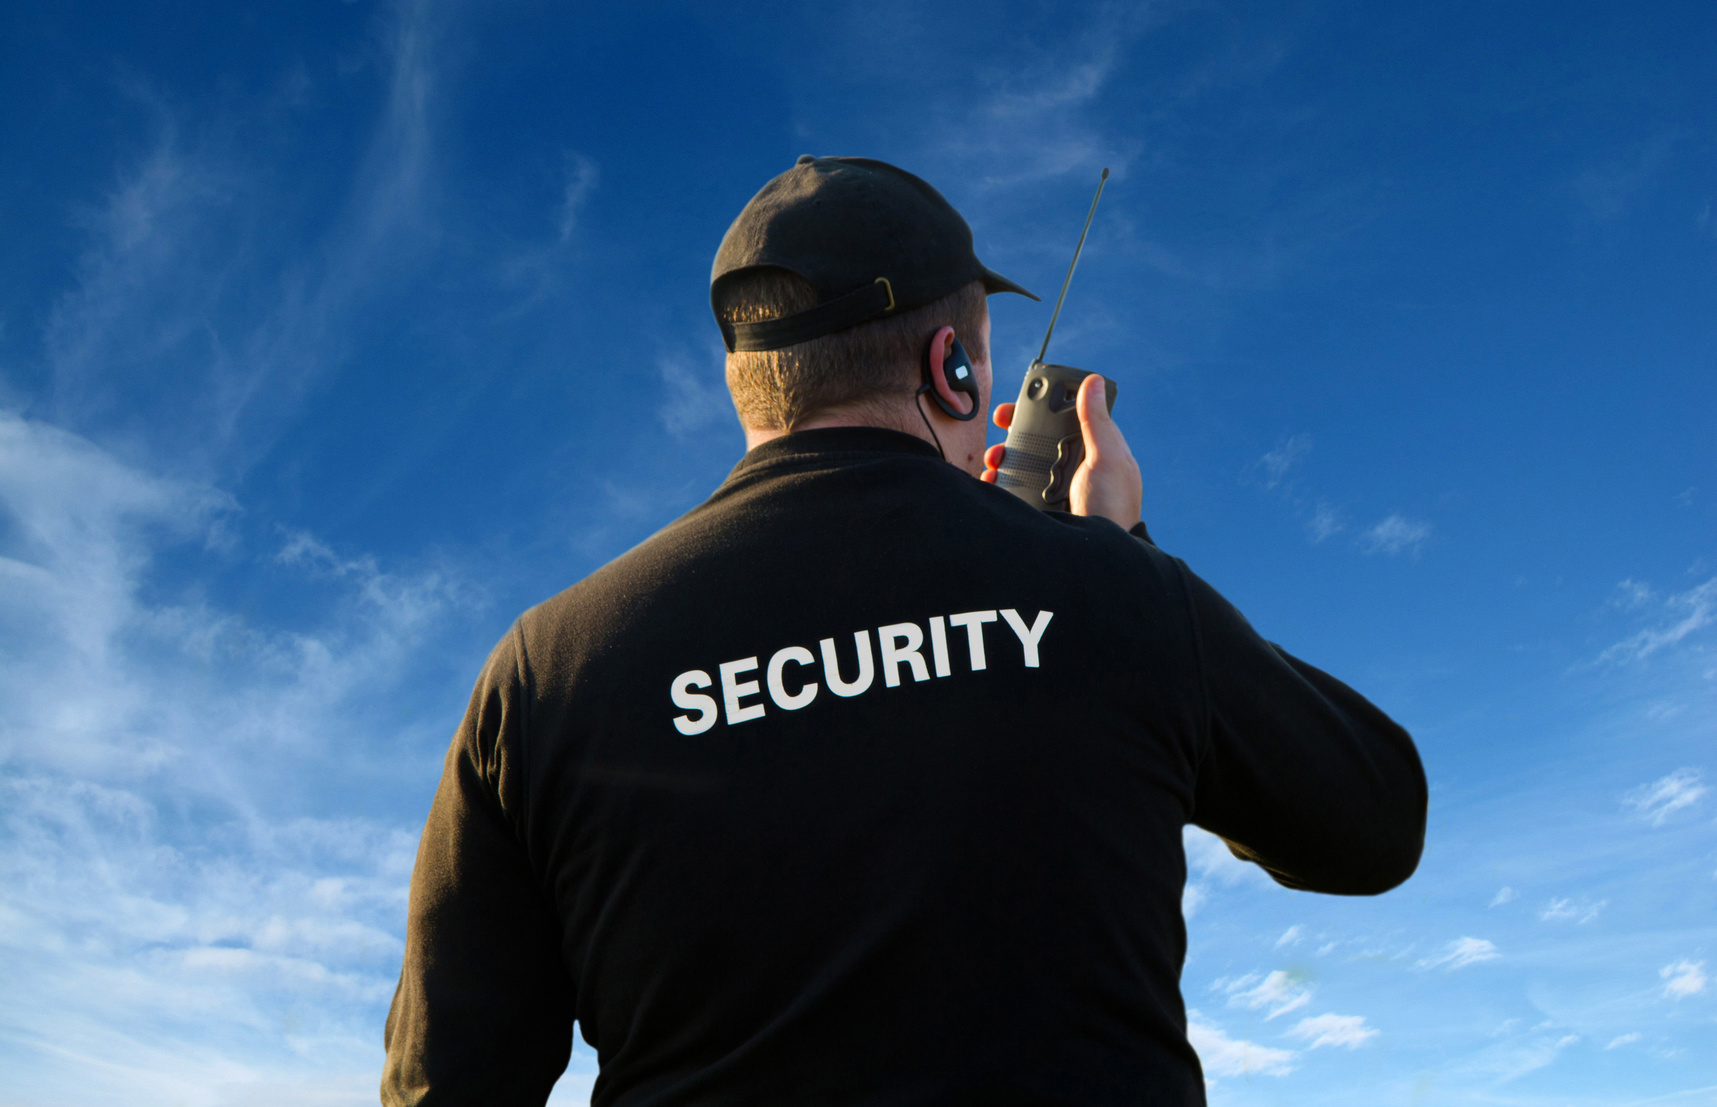 Potential-Security-1_The-Main-Responsibilities-of-Private-Security-Guards_Image.jpg